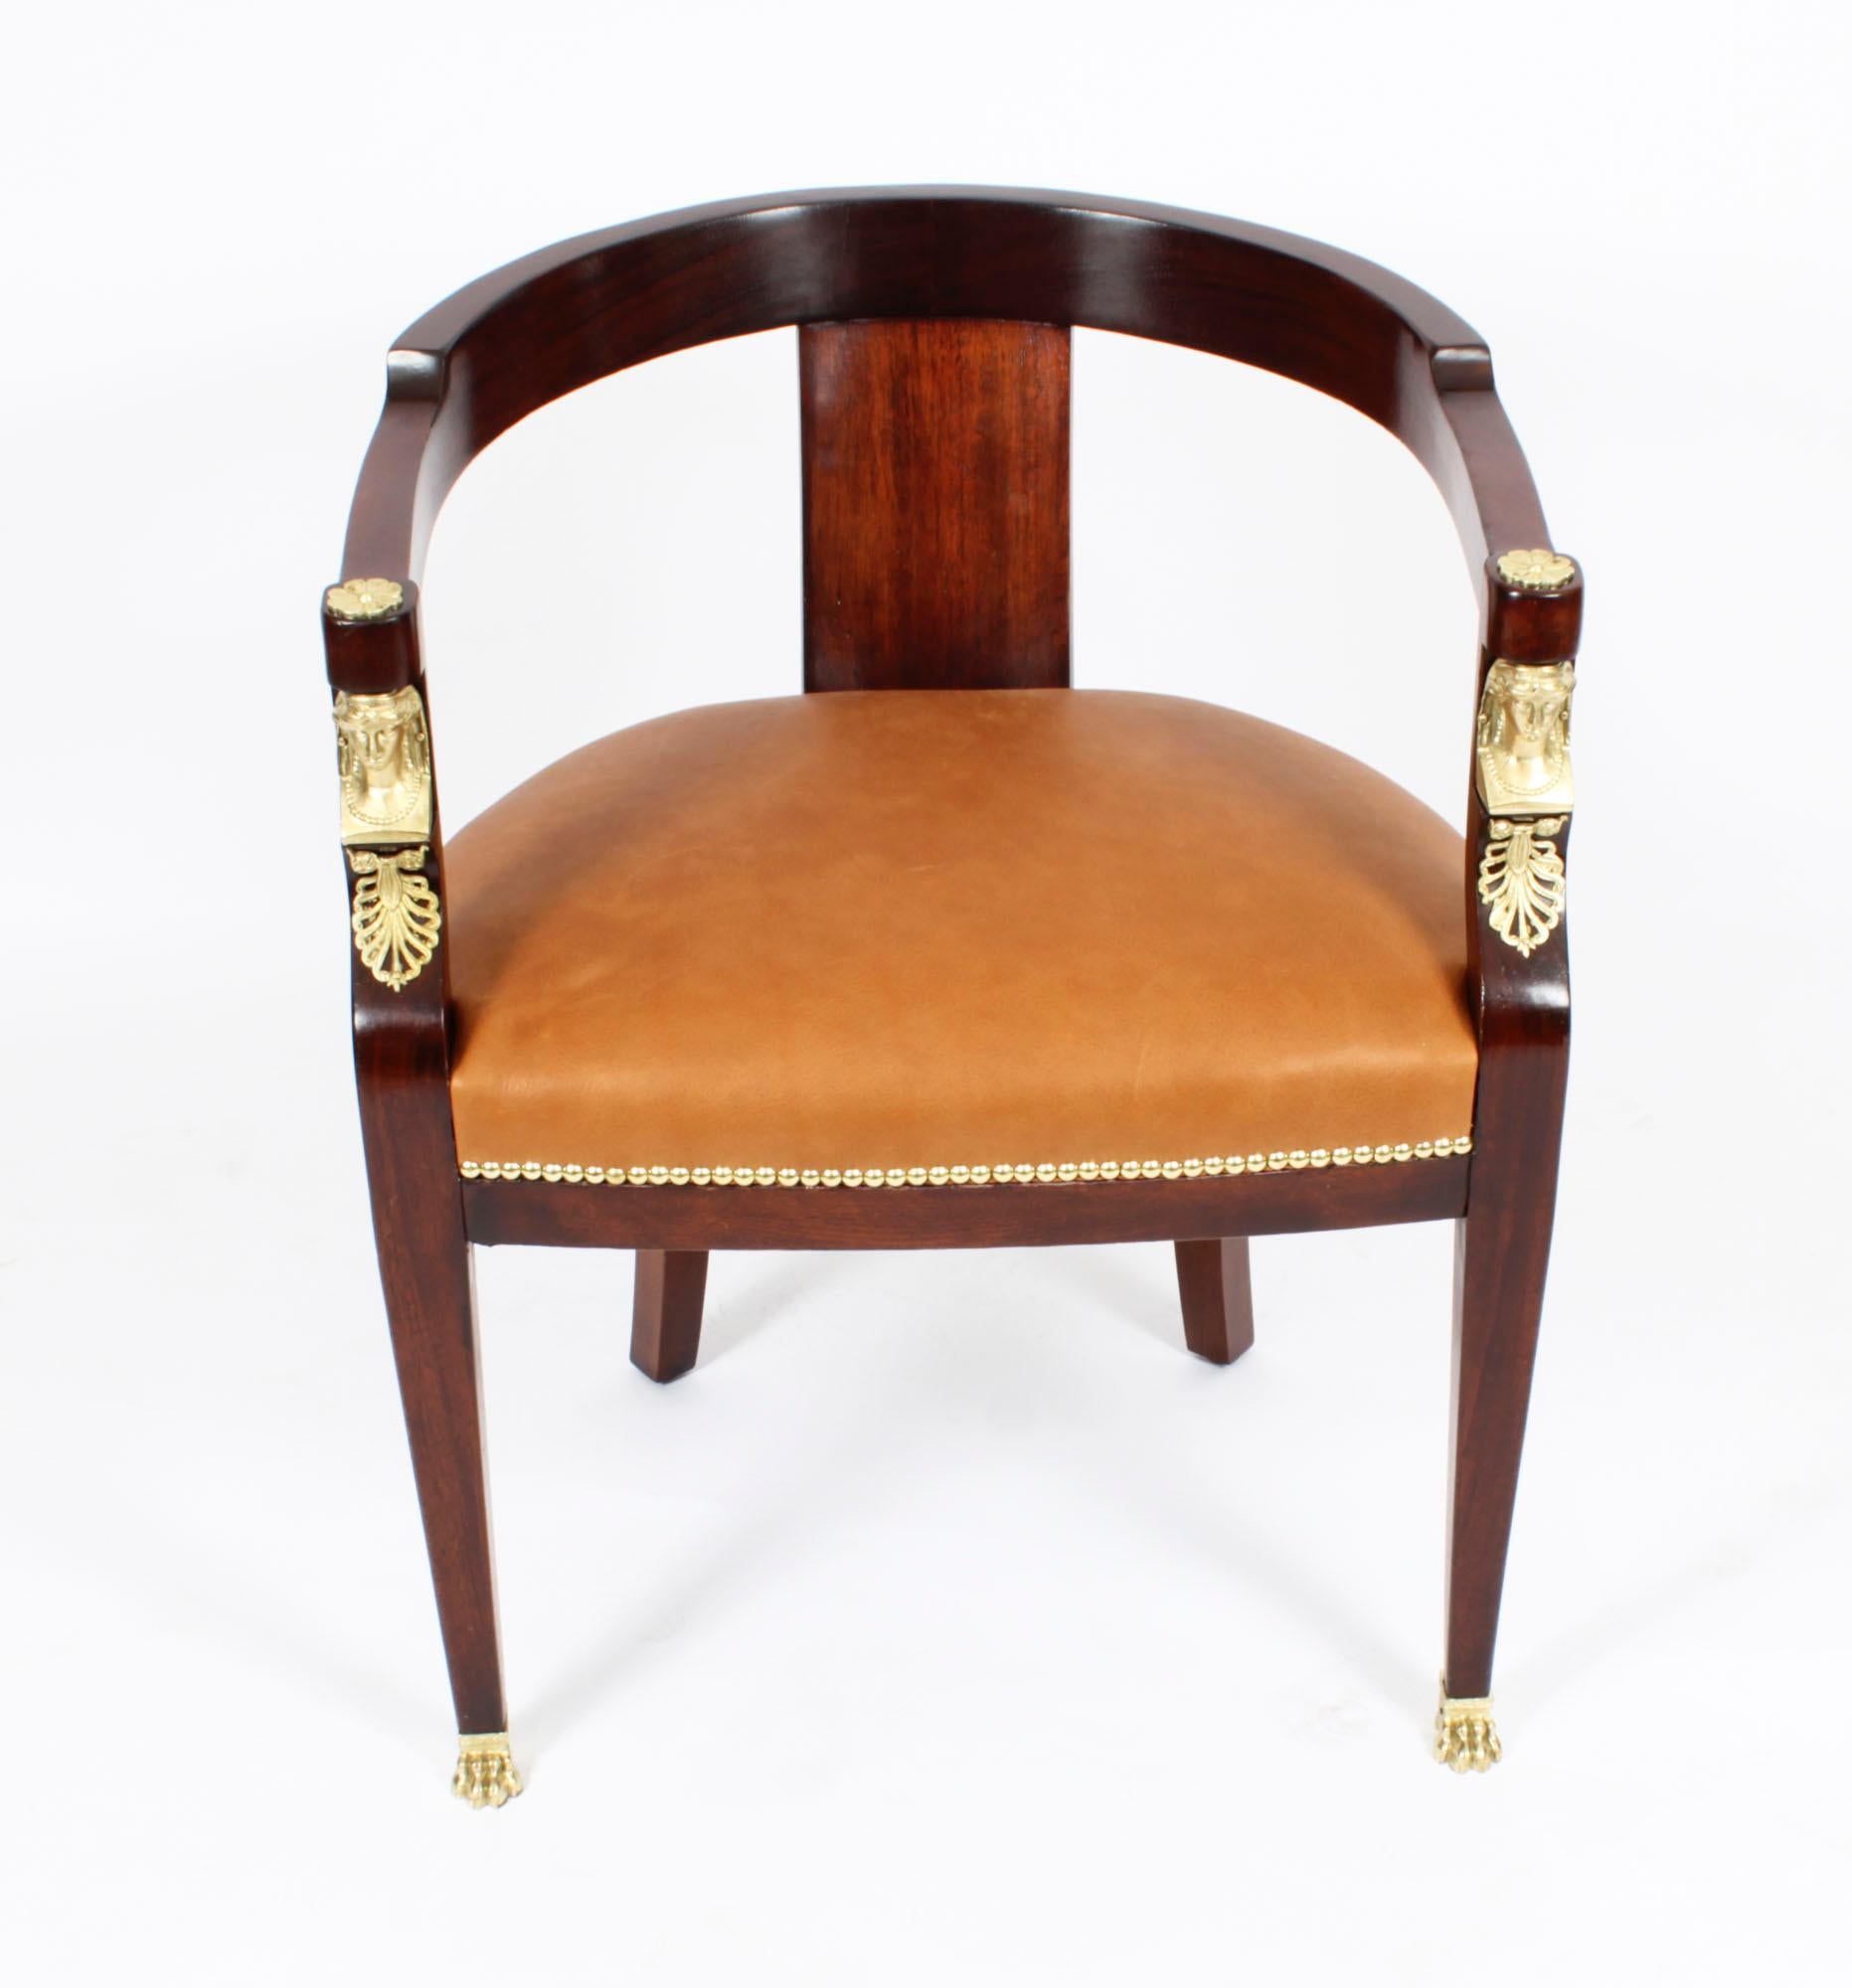 This is a beautiful antique French mahogany Empire 